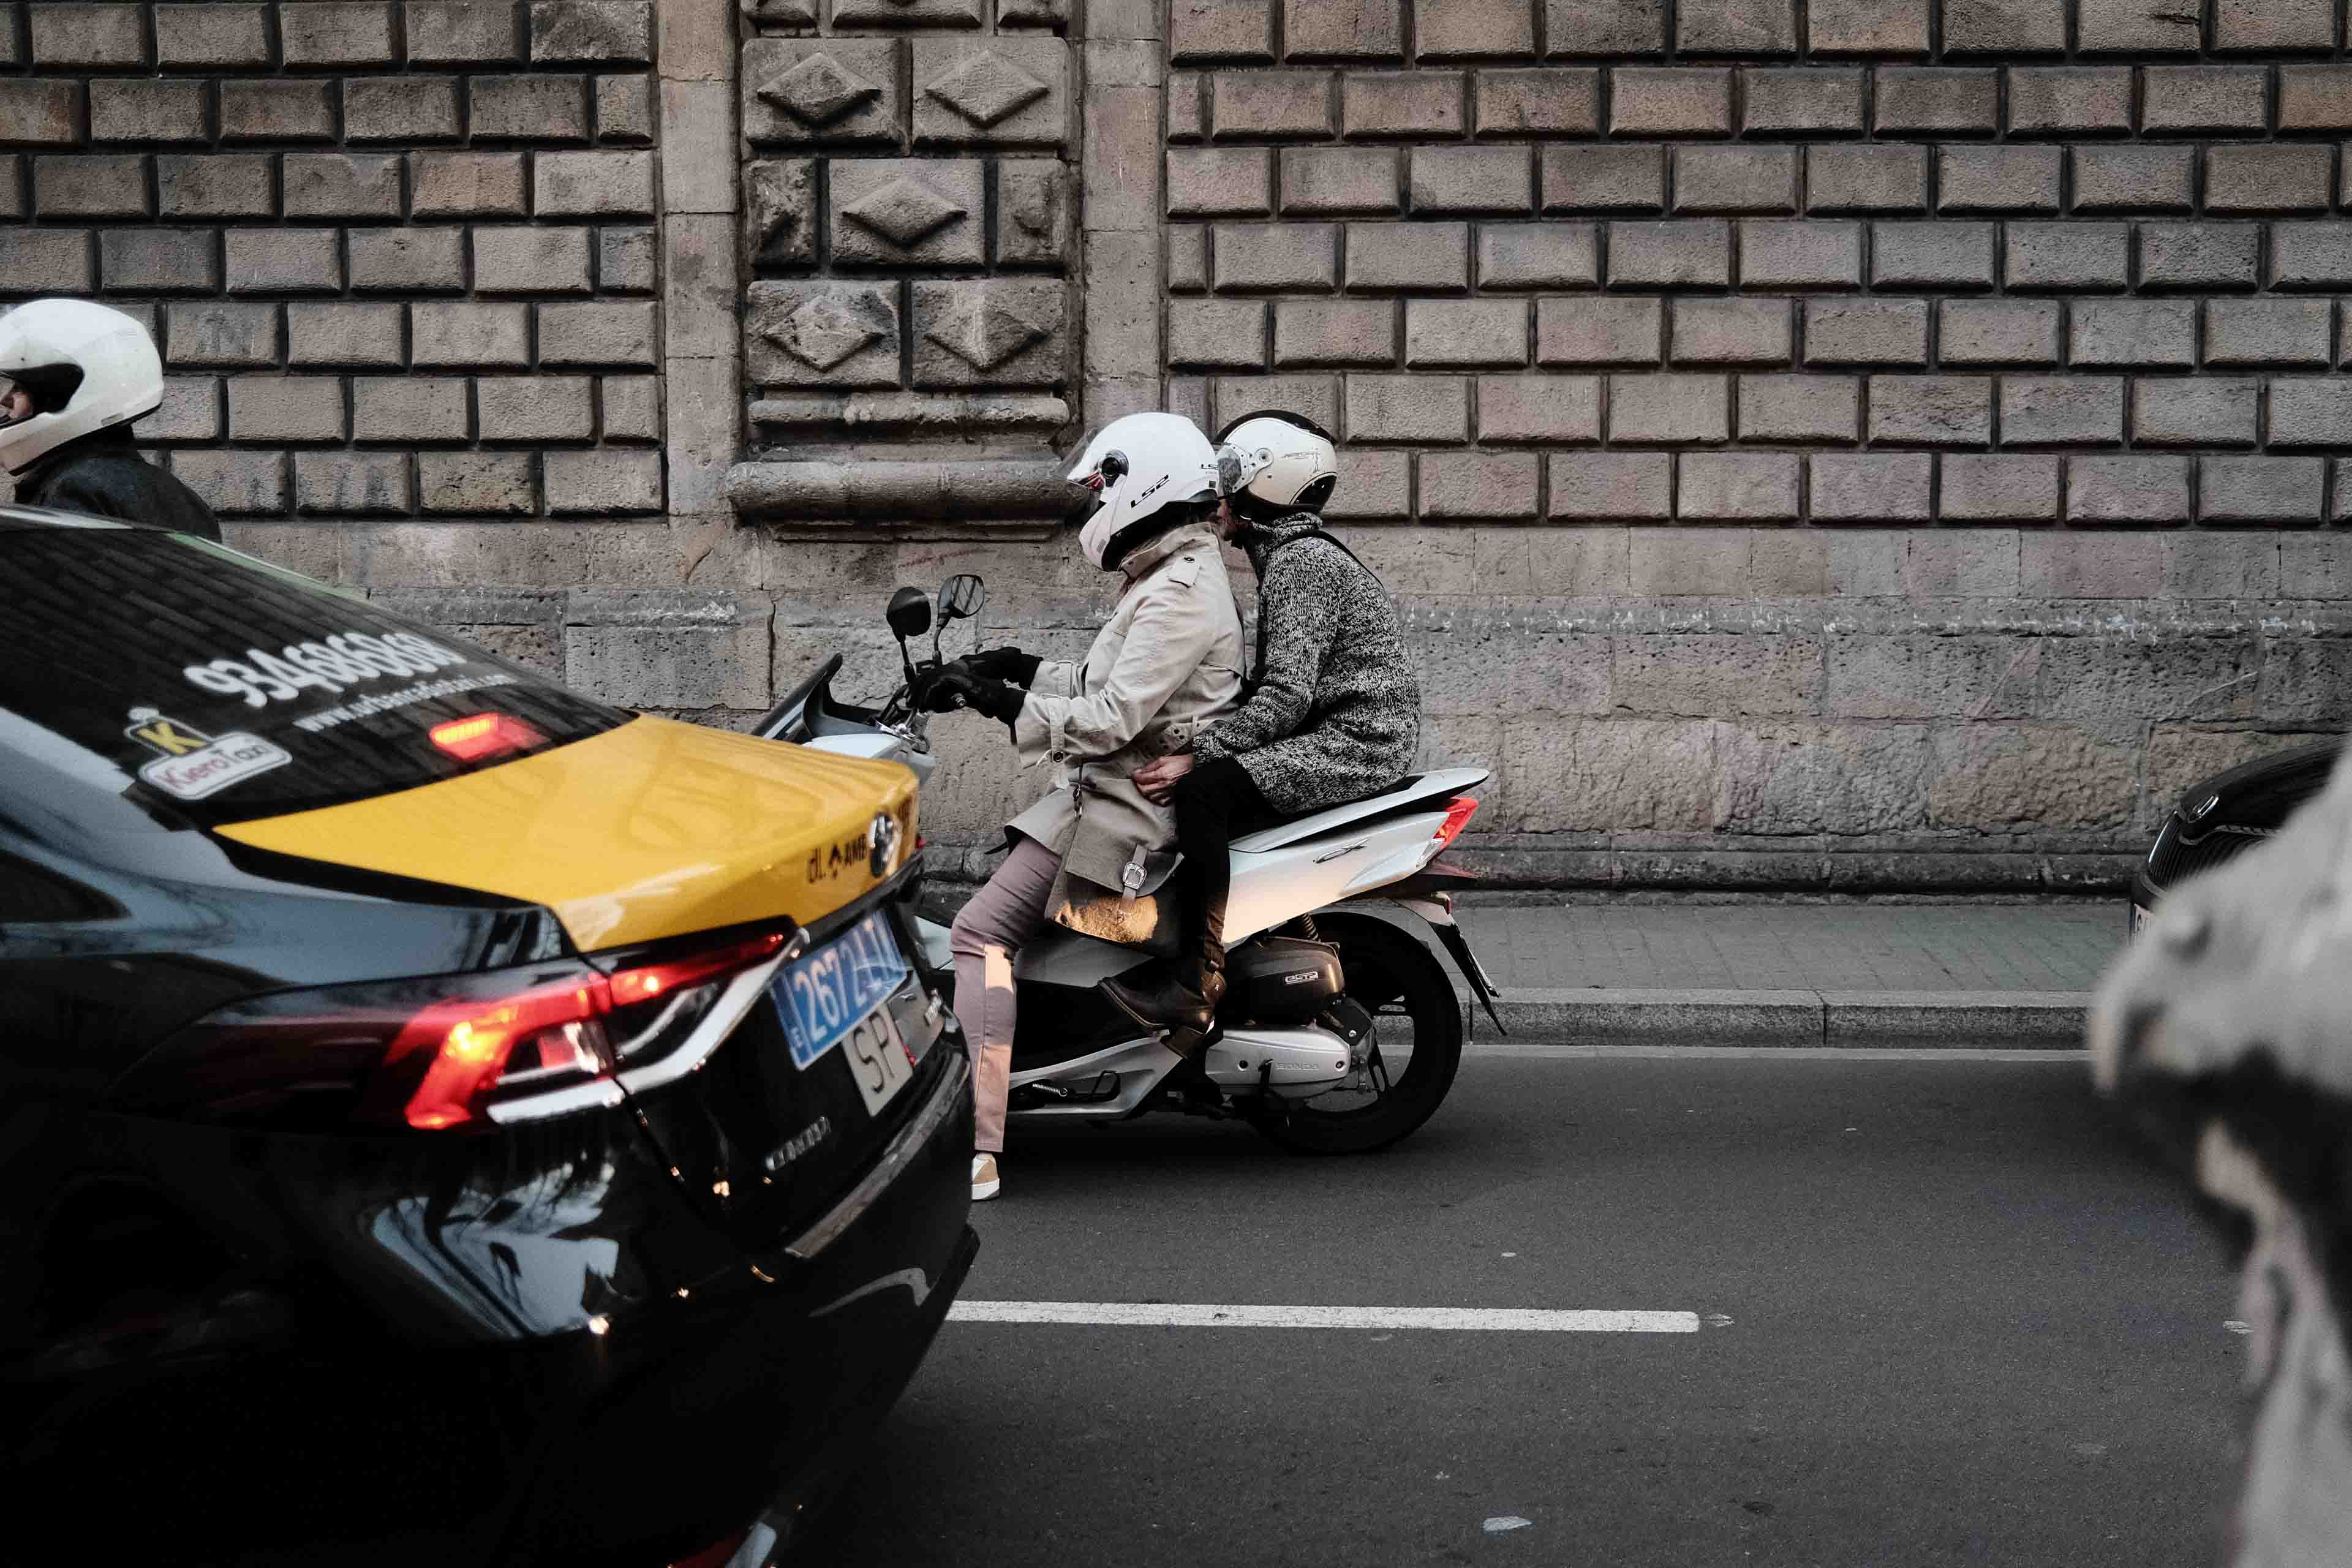 Two people on a scooter in traffic